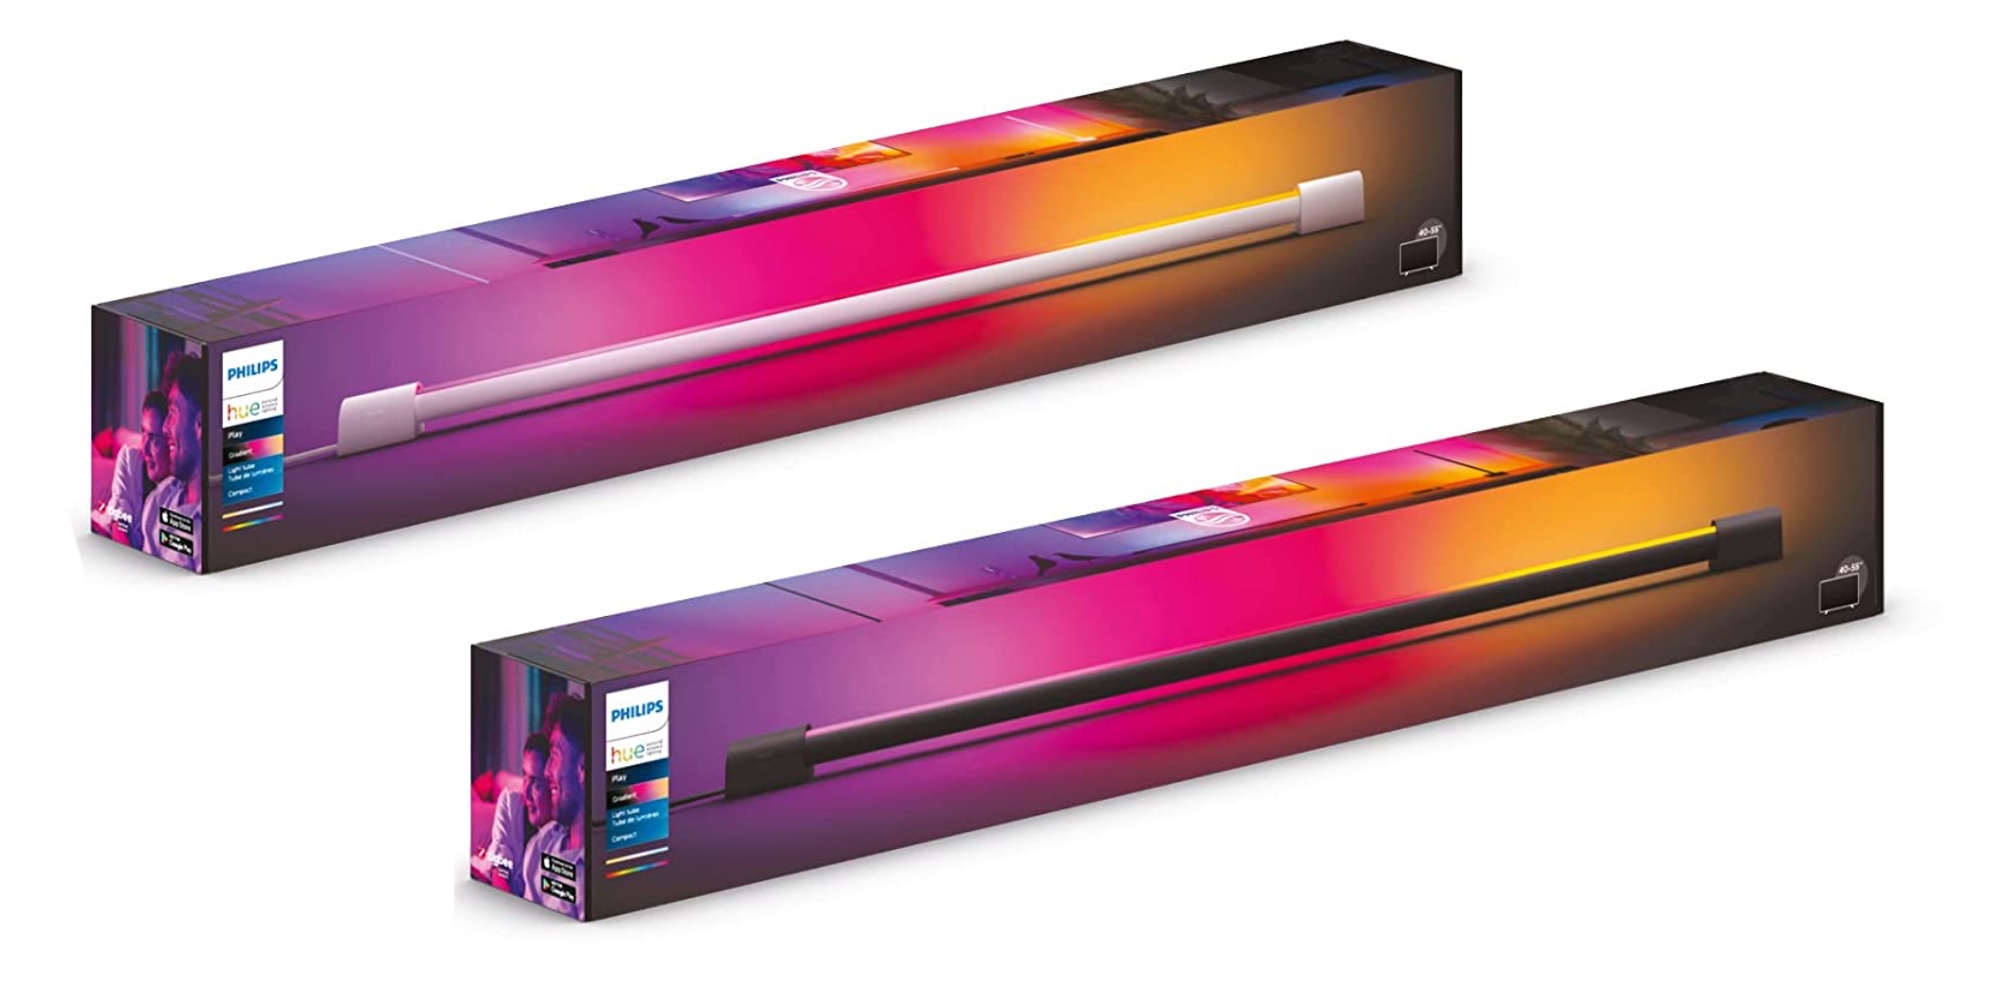 Philips Hue Gradient Tube debuts with RGB LEDS - 9to5Toys